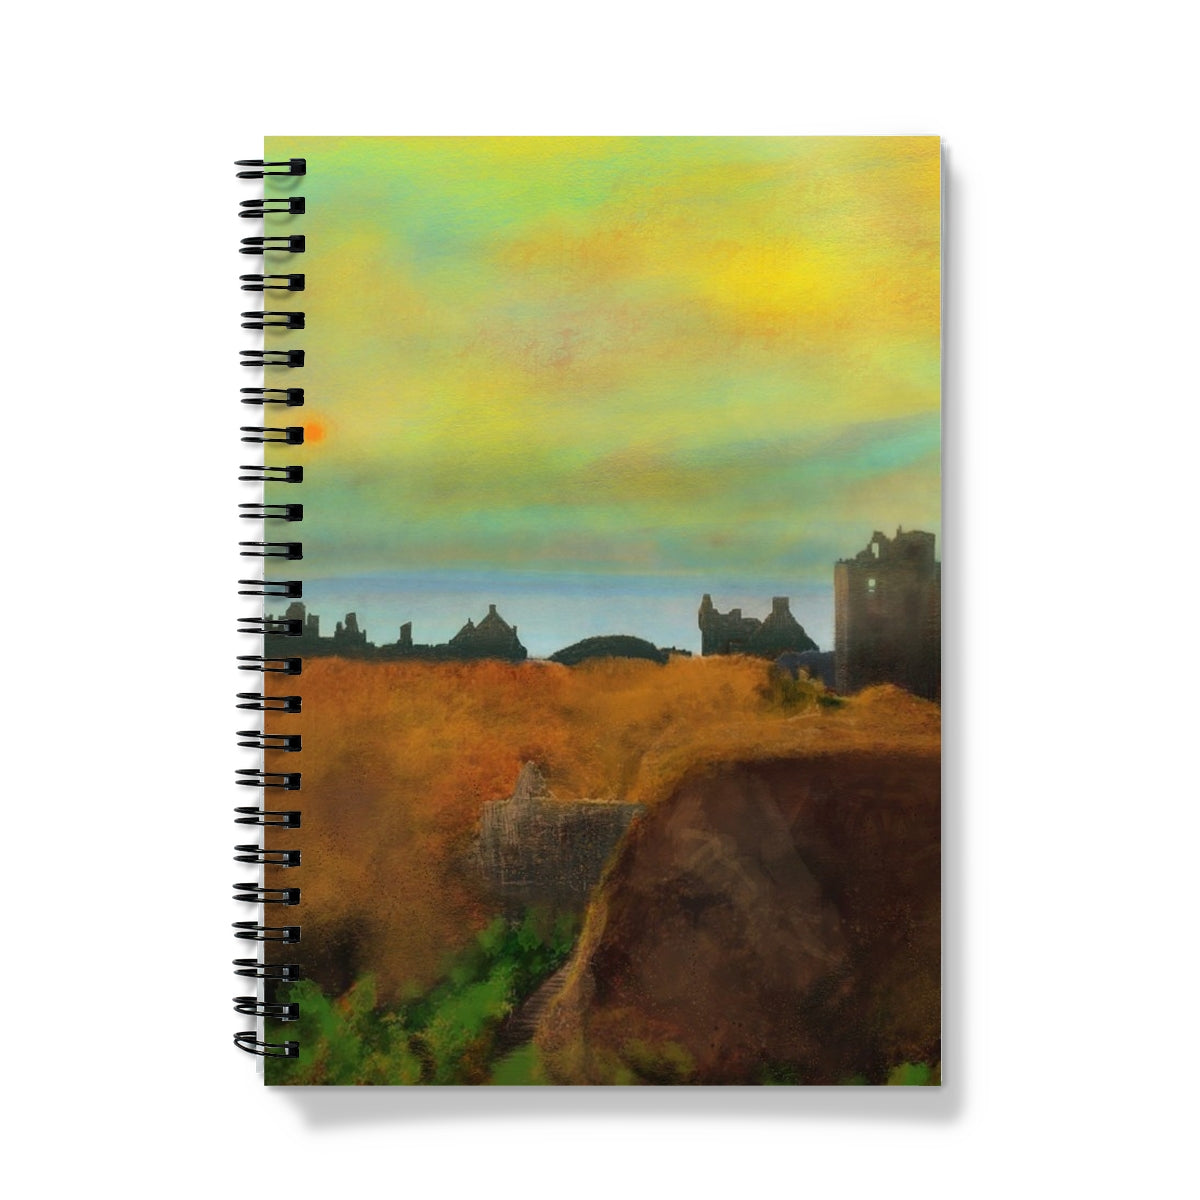 Dunnottar Castle Art Gifts Notebook-Journals & Notebooks-Historic & Iconic Scotland Art Gallery-A5-Graph-Paintings, Prints, Homeware, Art Gifts From Scotland By Scottish Artist Kevin Hunter